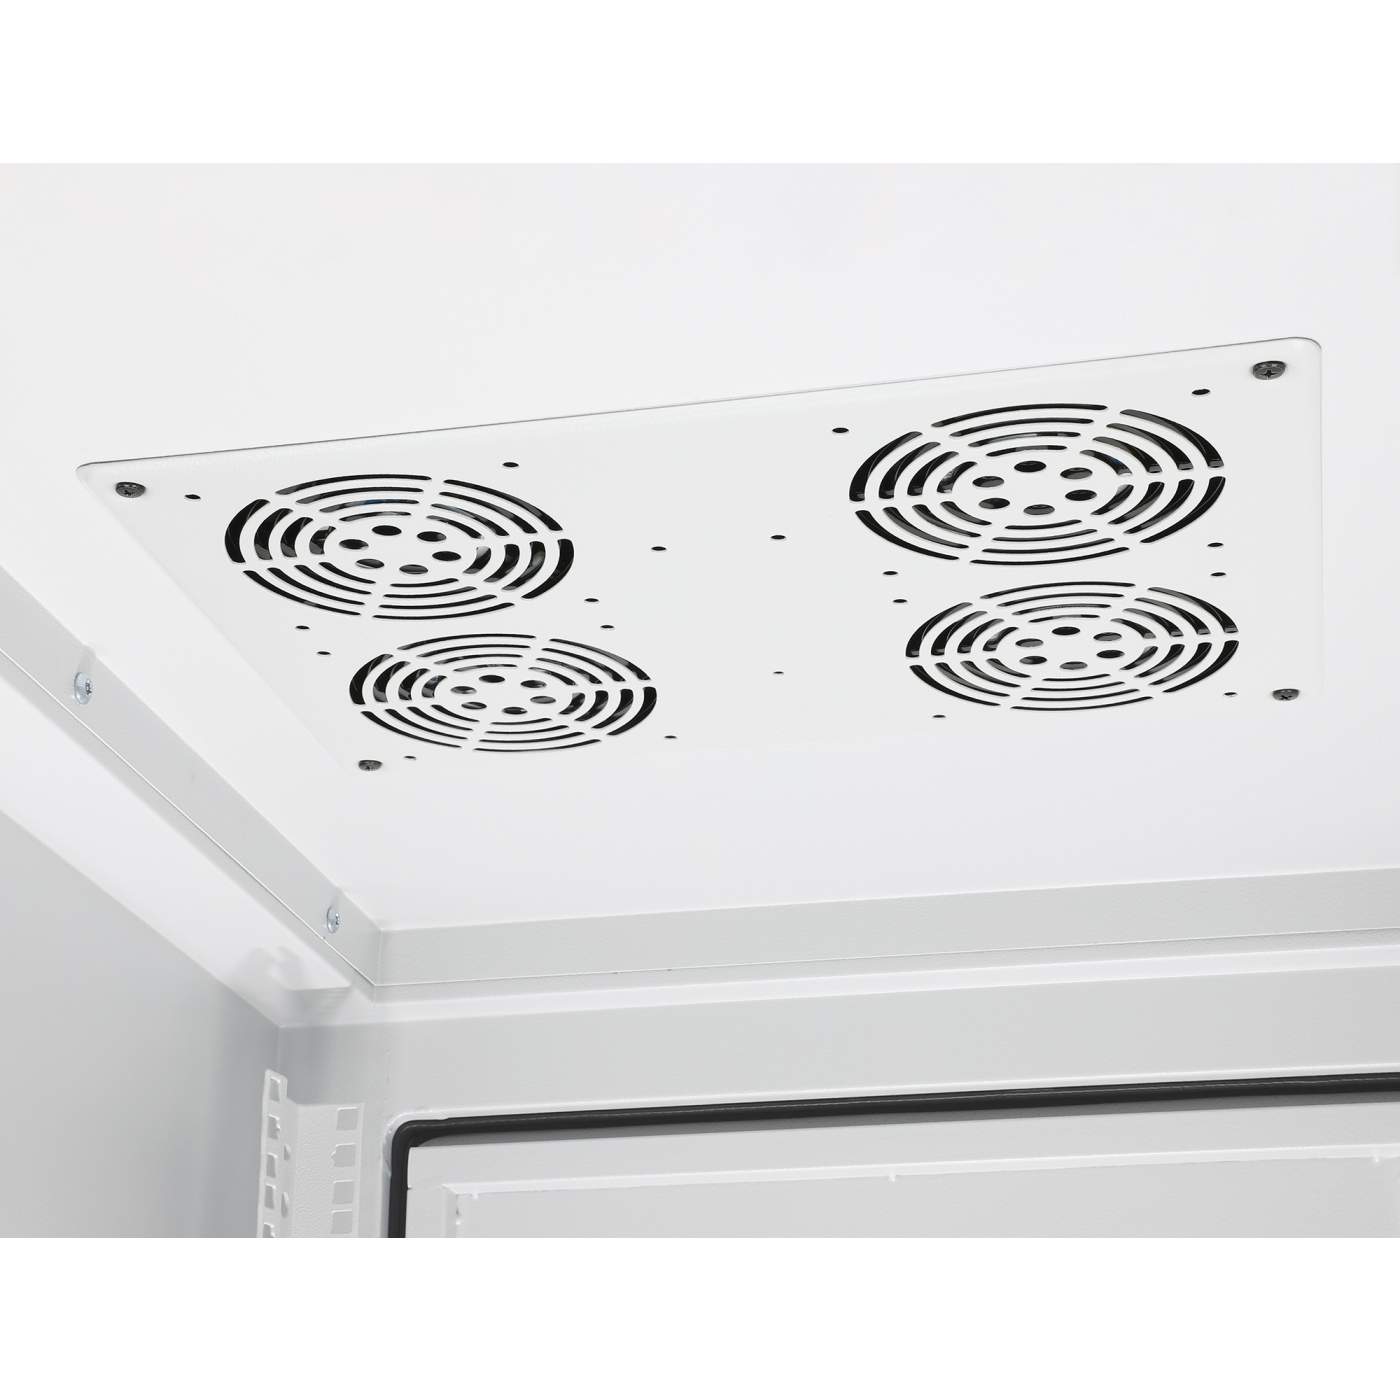 Industrial IP55 19" Network Cabinet with Integrated Fans, 42U Image 7